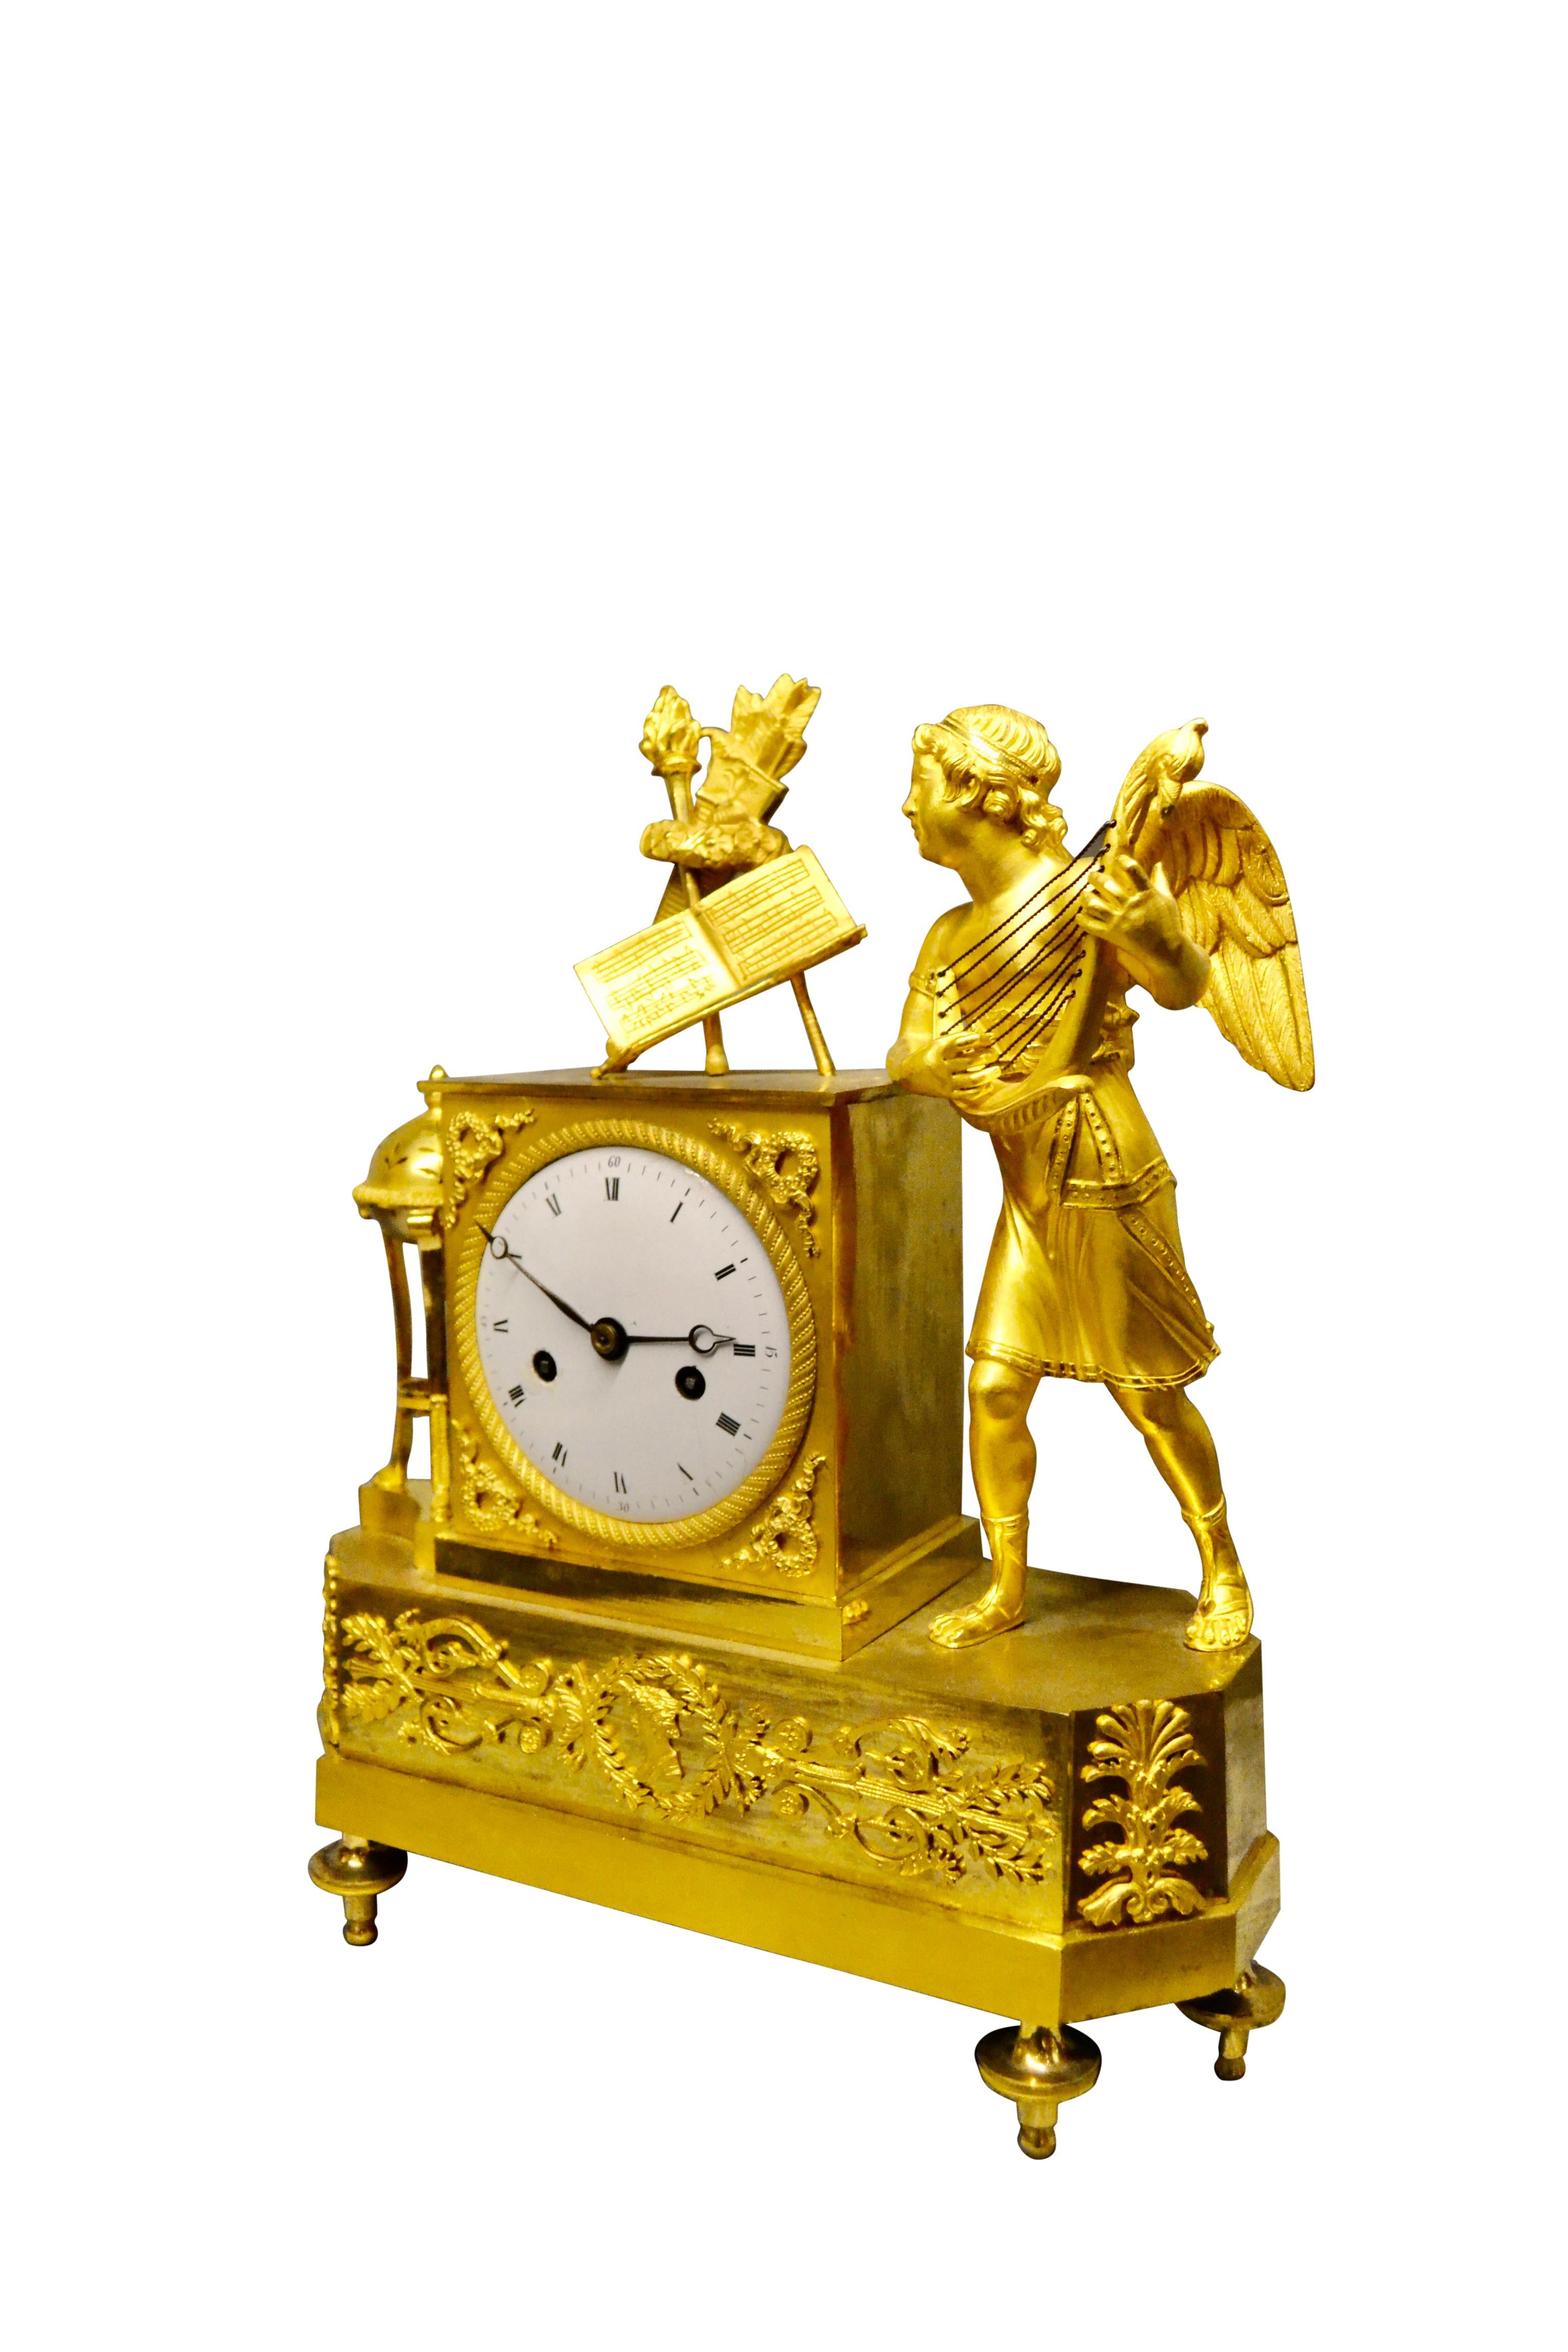 Gilt Period French Empire Mantle Clock Depicting a Winged Cupid Playing a Lute For Sale